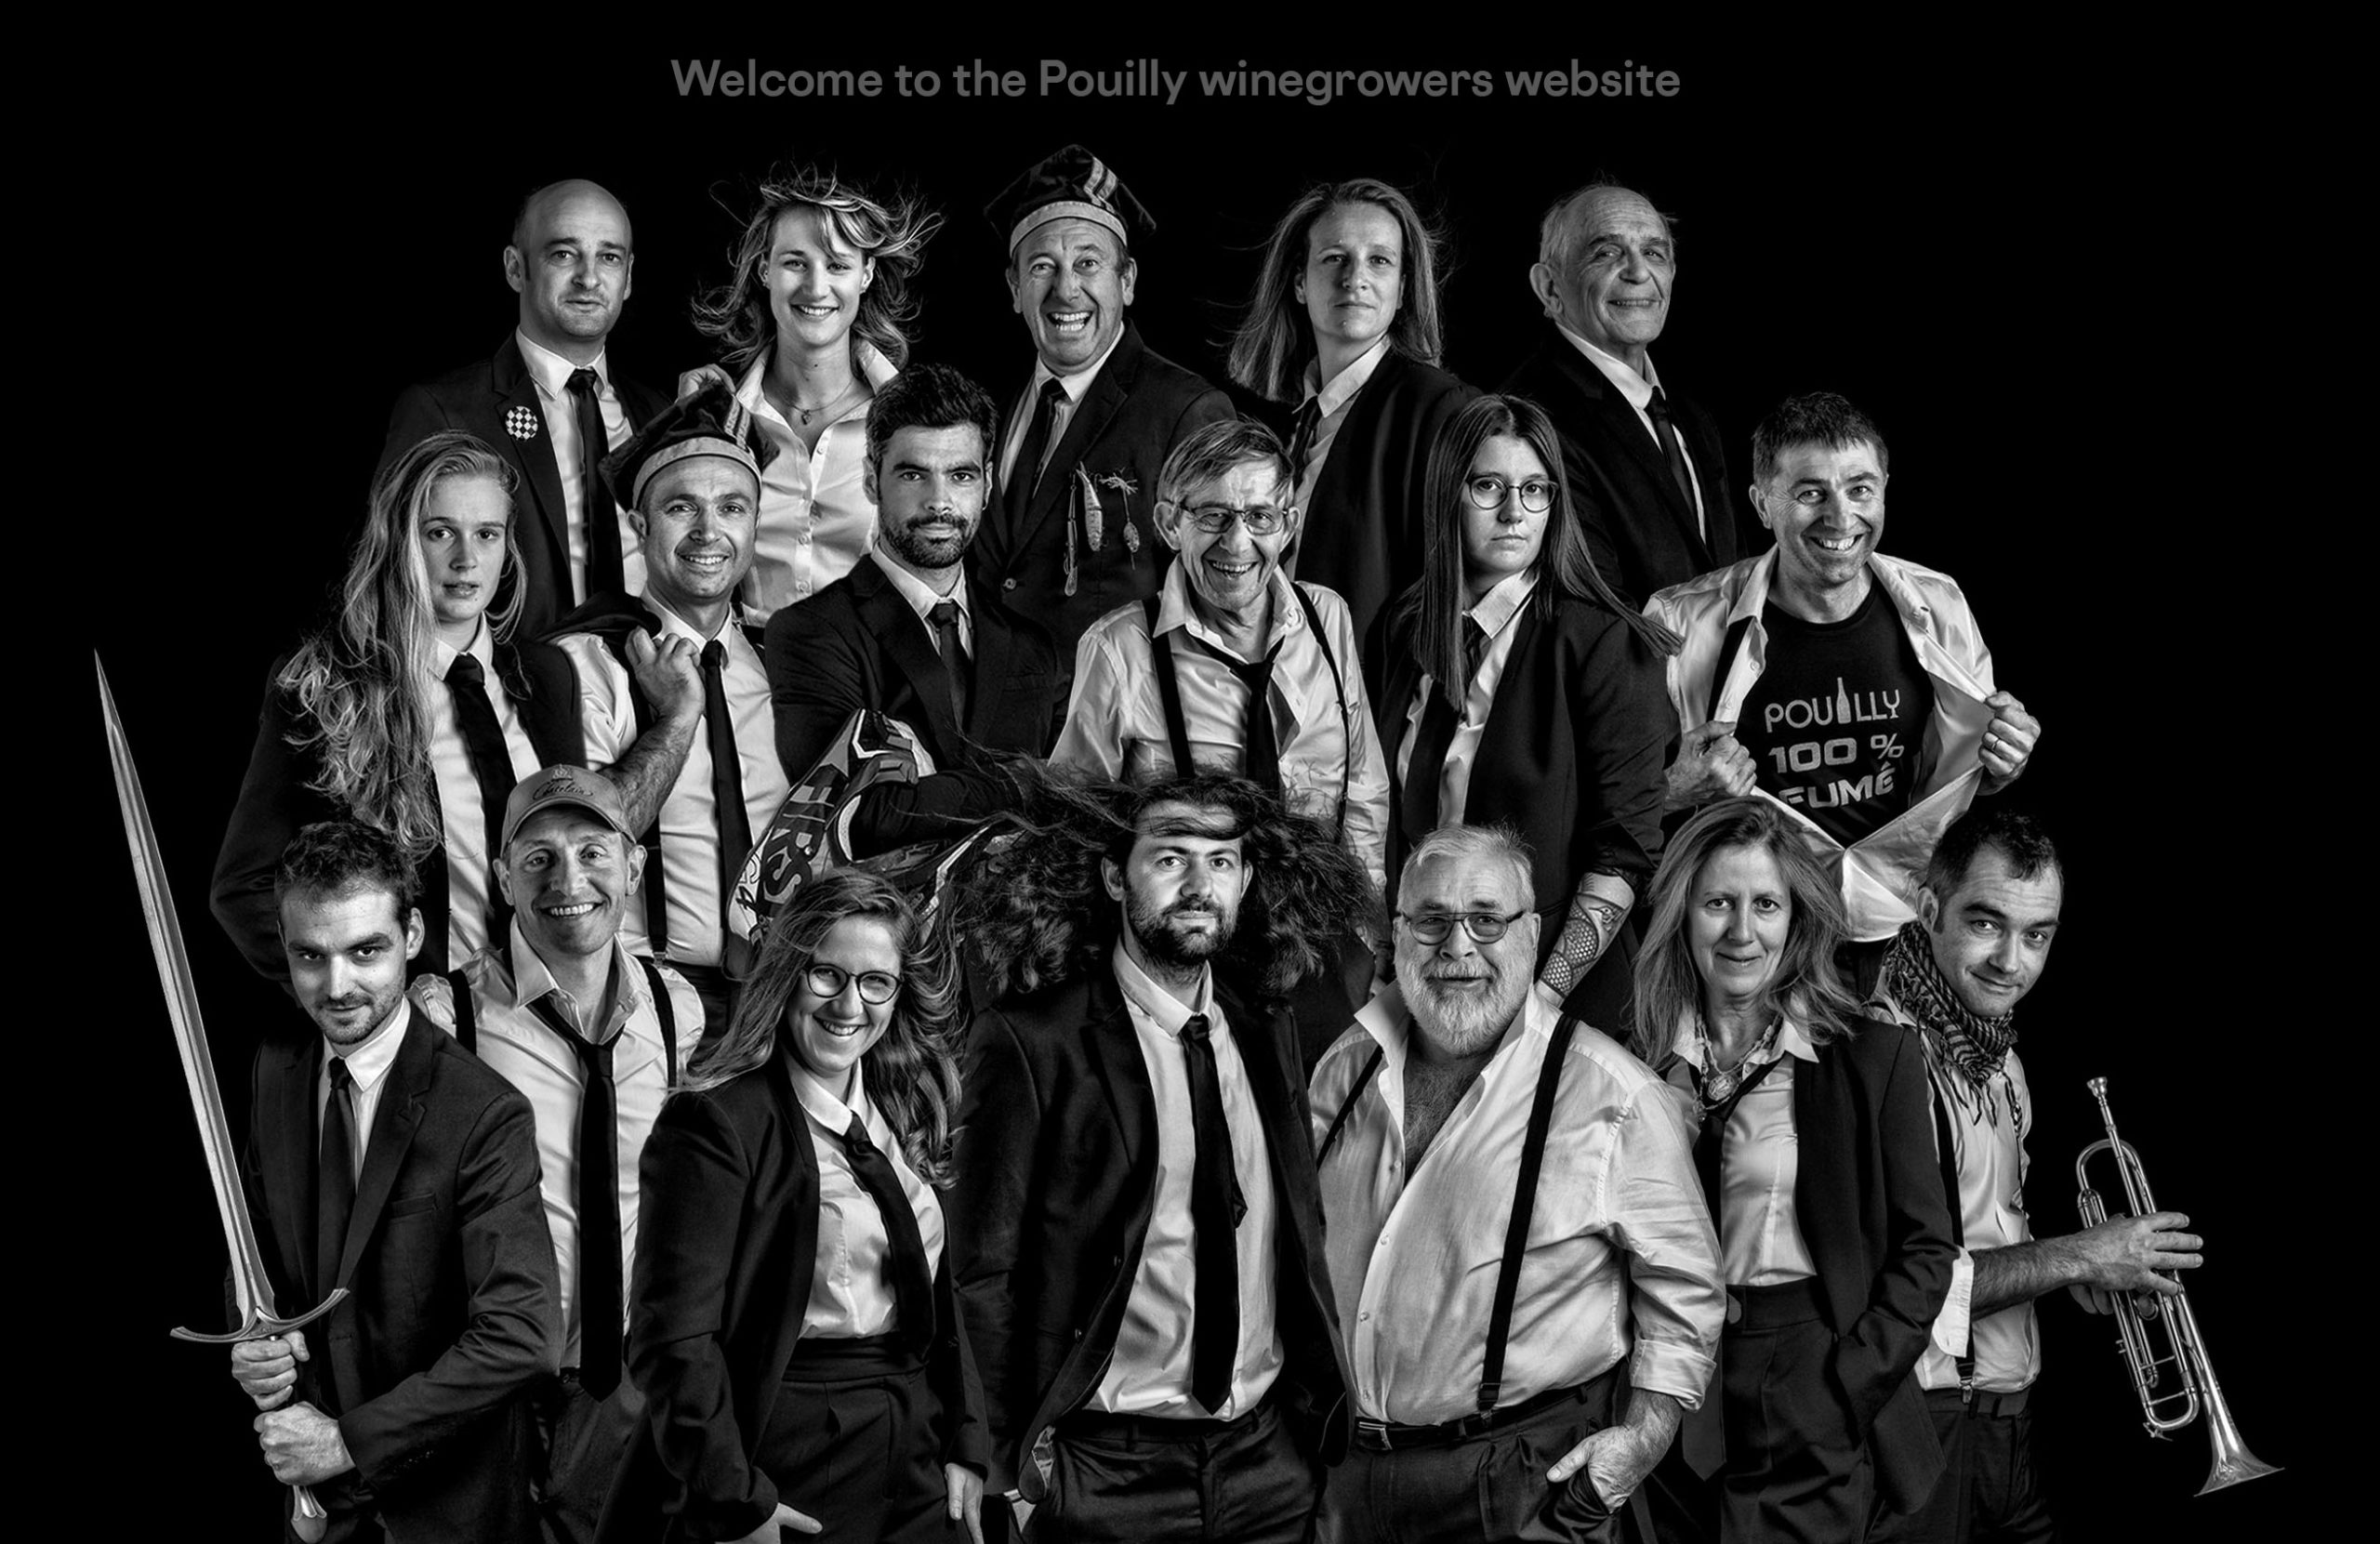 Welcome to the Pouilly winegrowers website